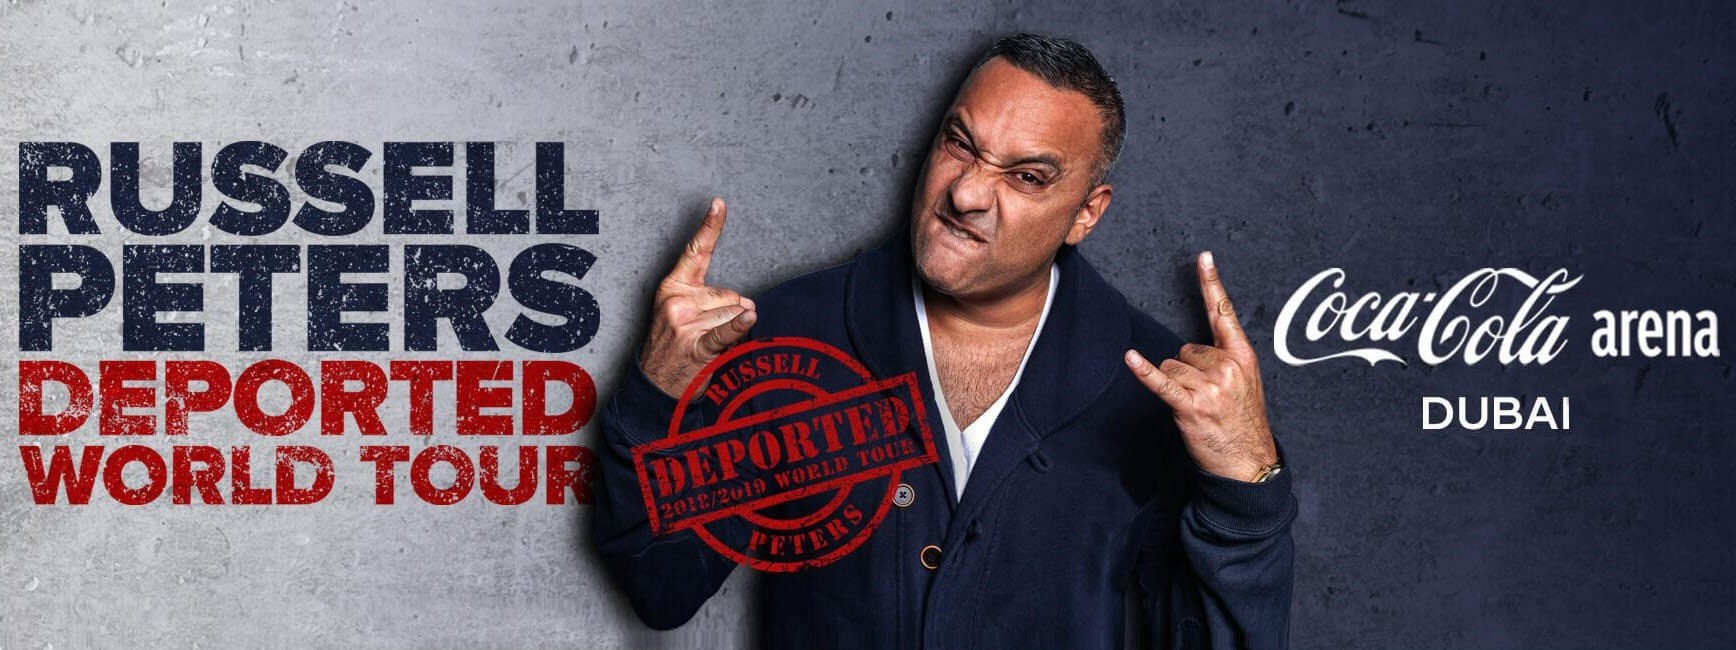 Russell Peters Comedy Show at Coca-Cola Arena - Coming Soon in UAE